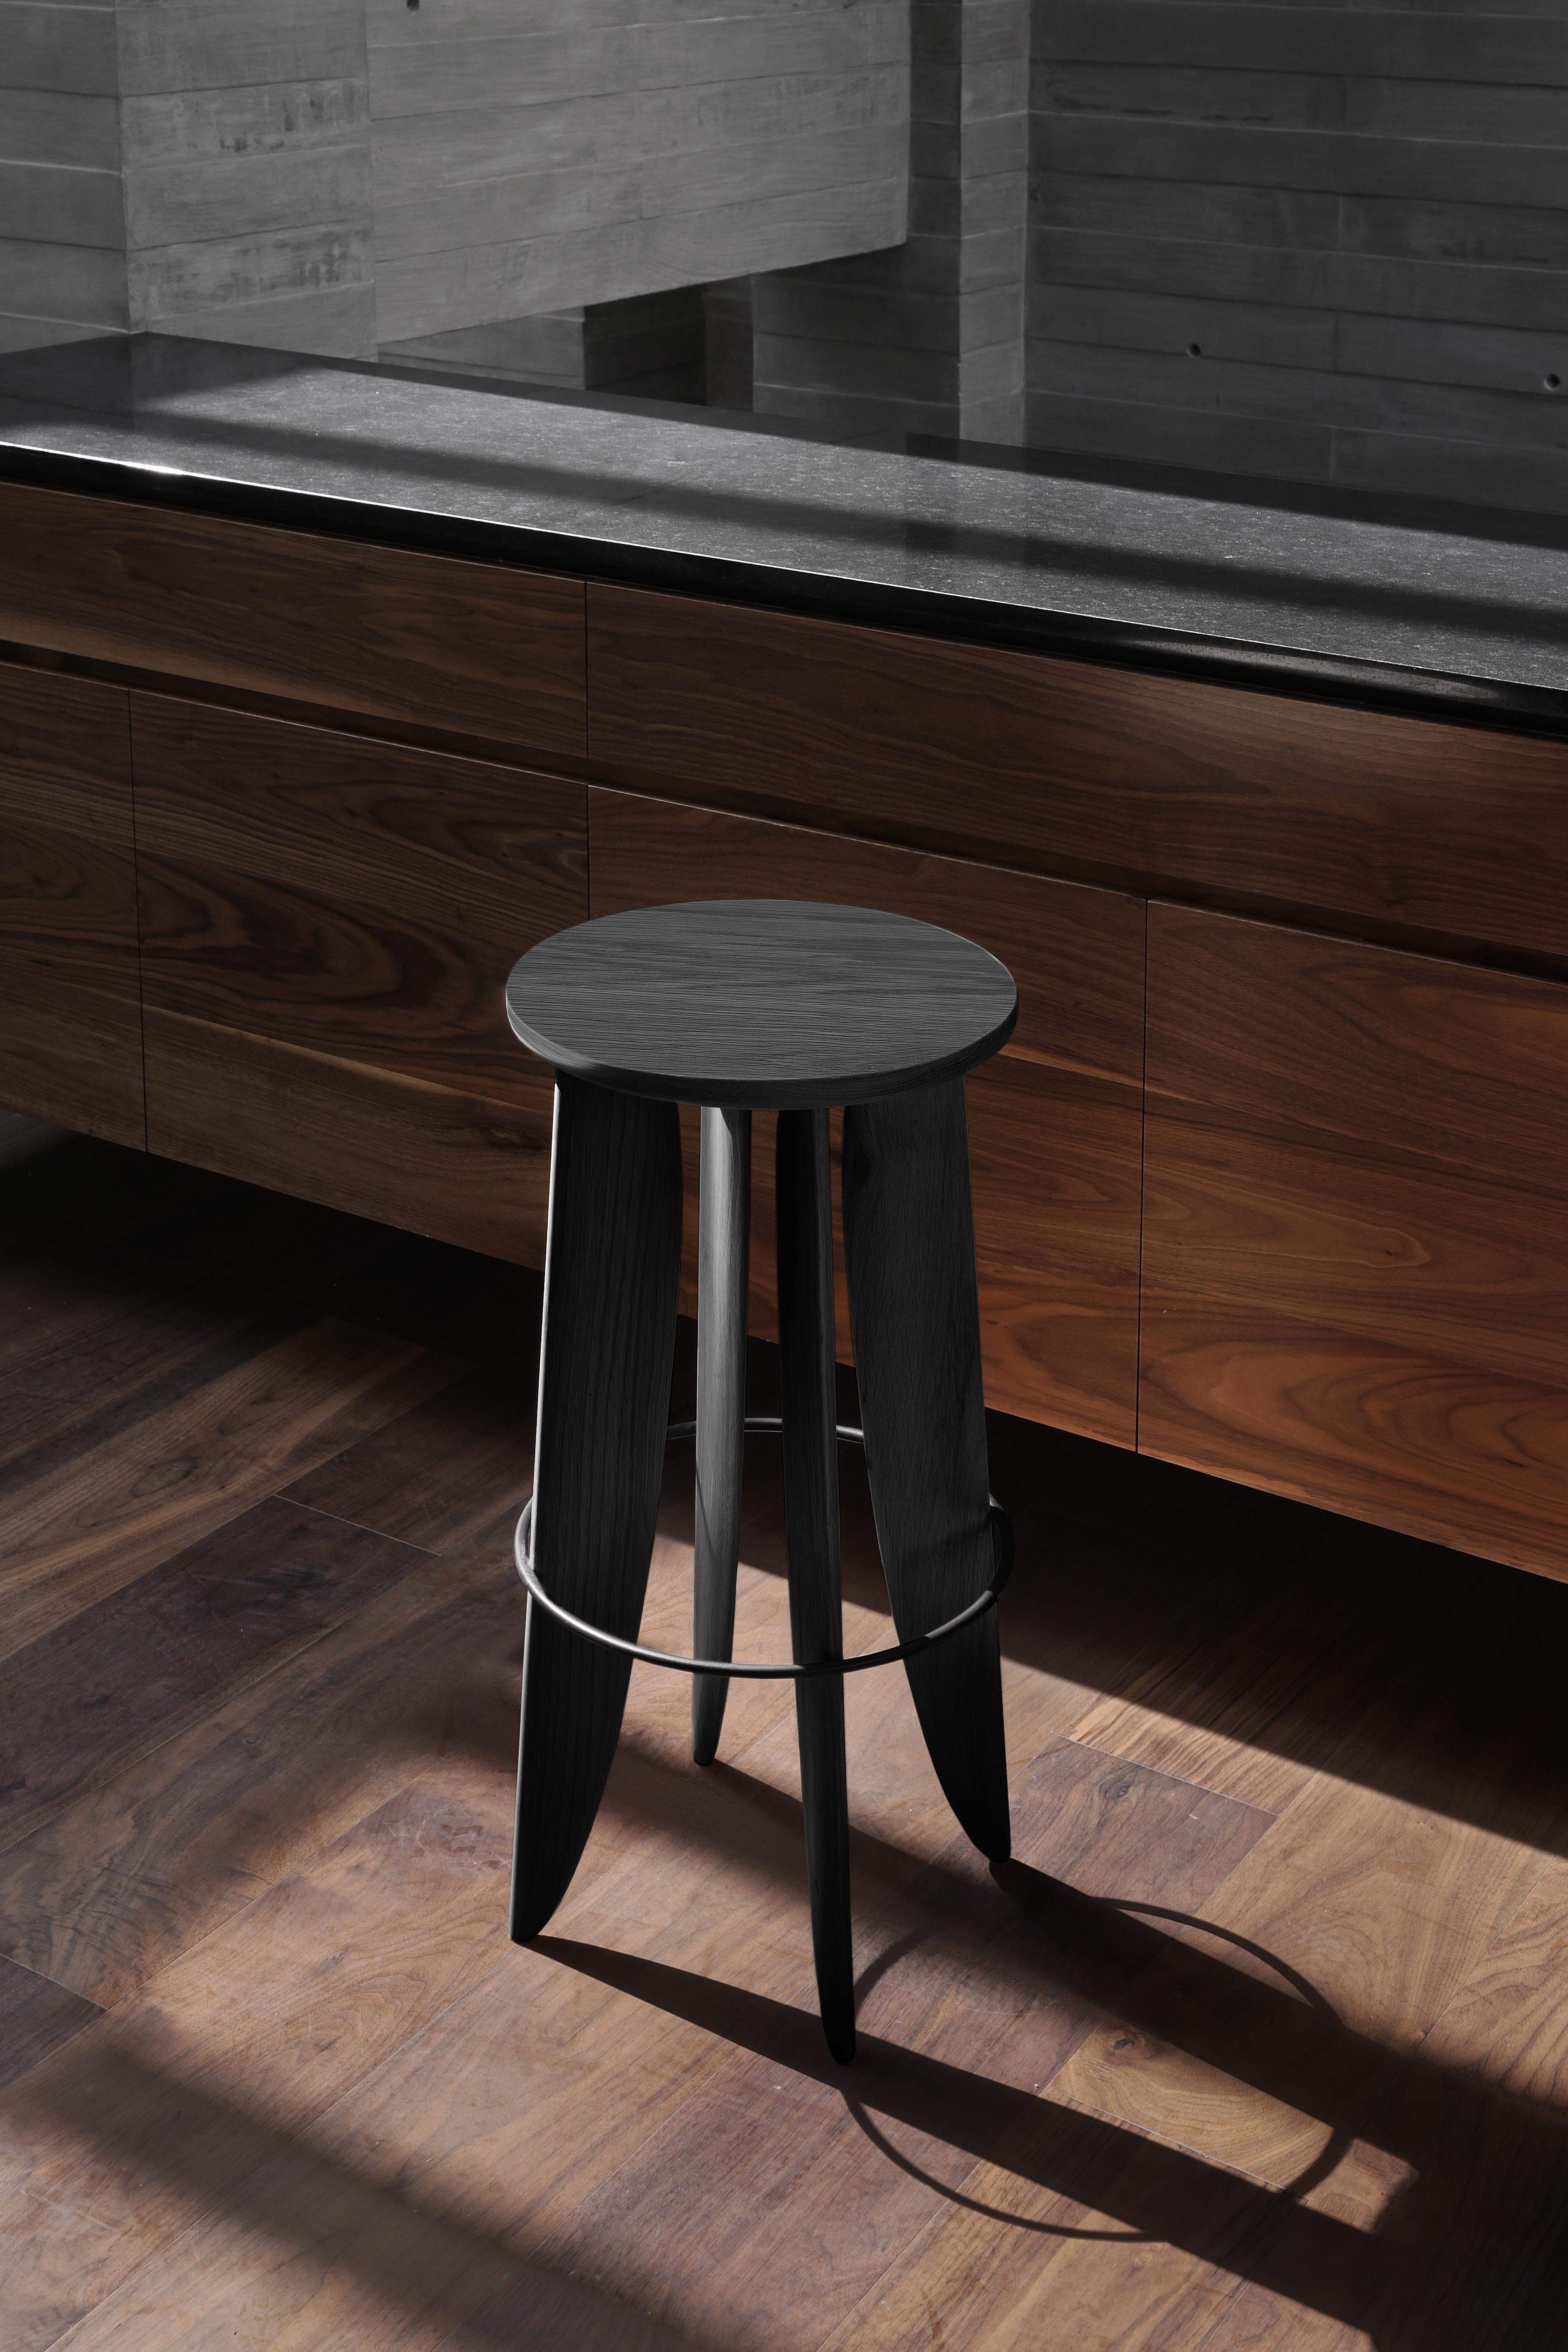 Noviembre XIII Counter Stool in Burned Oak Wood by Joel Escalona

The Noviembre collection is inspired by the creative values of Constantin Brancusi, a Romanian sculptor considered one of the most influential artists of the twentieth century, who,